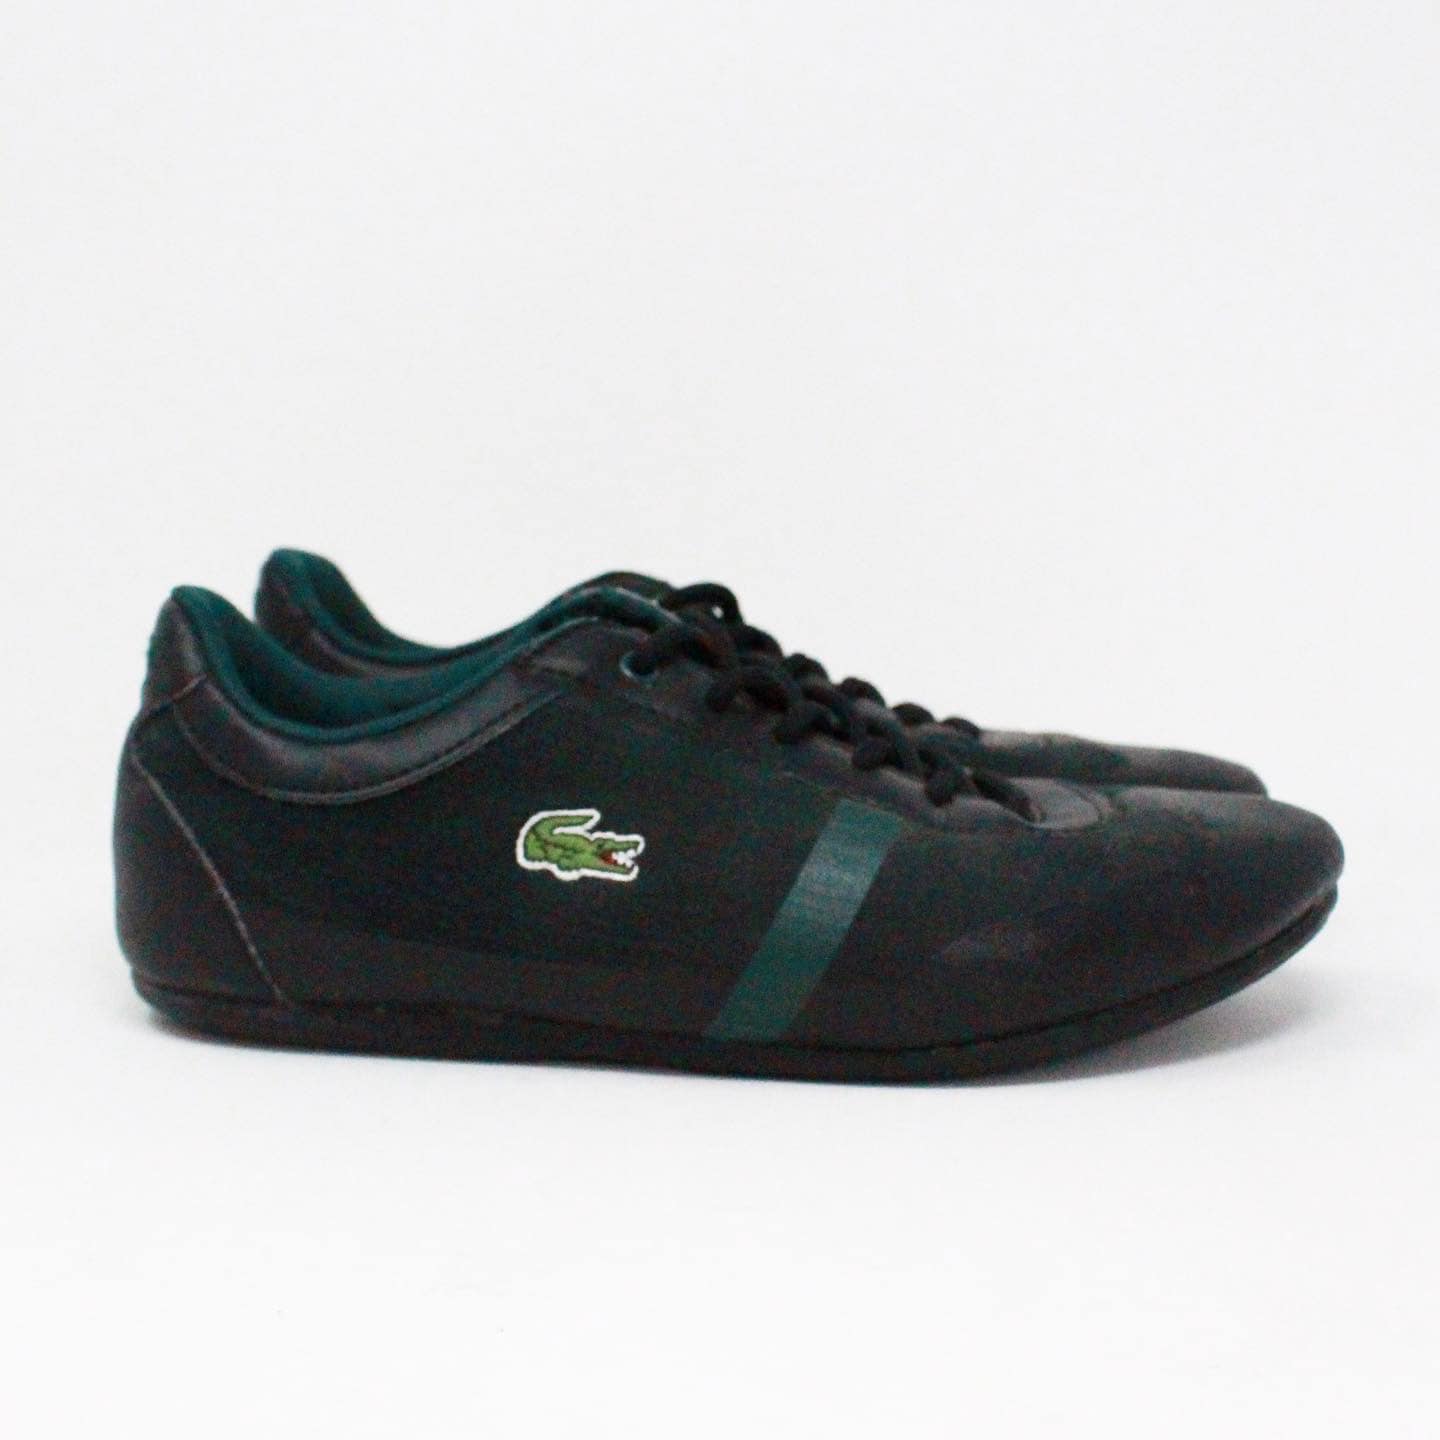 LACOSTE 38164 Youth Black and Green Sneakers US 4.5 EU 34.5 2